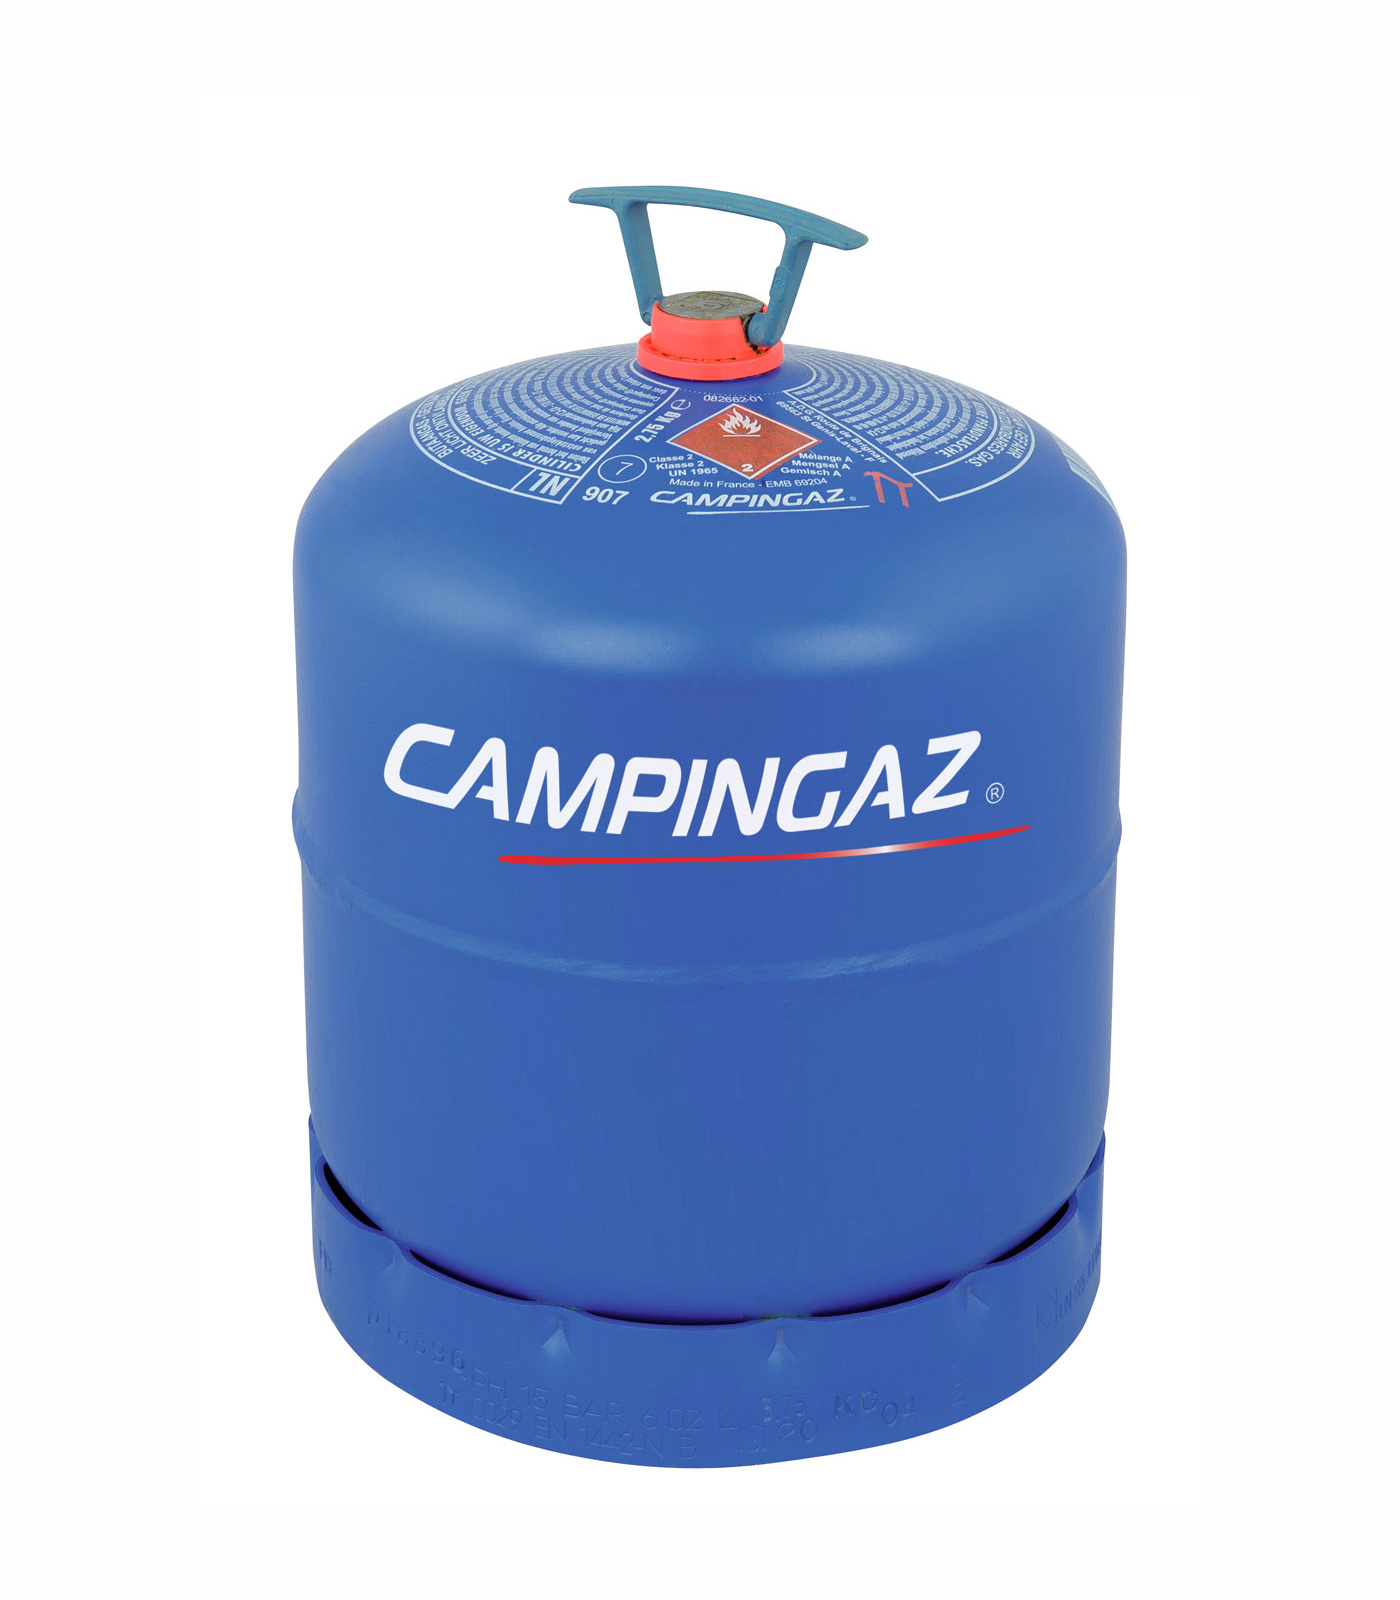 www.a2zcamping.co.uk